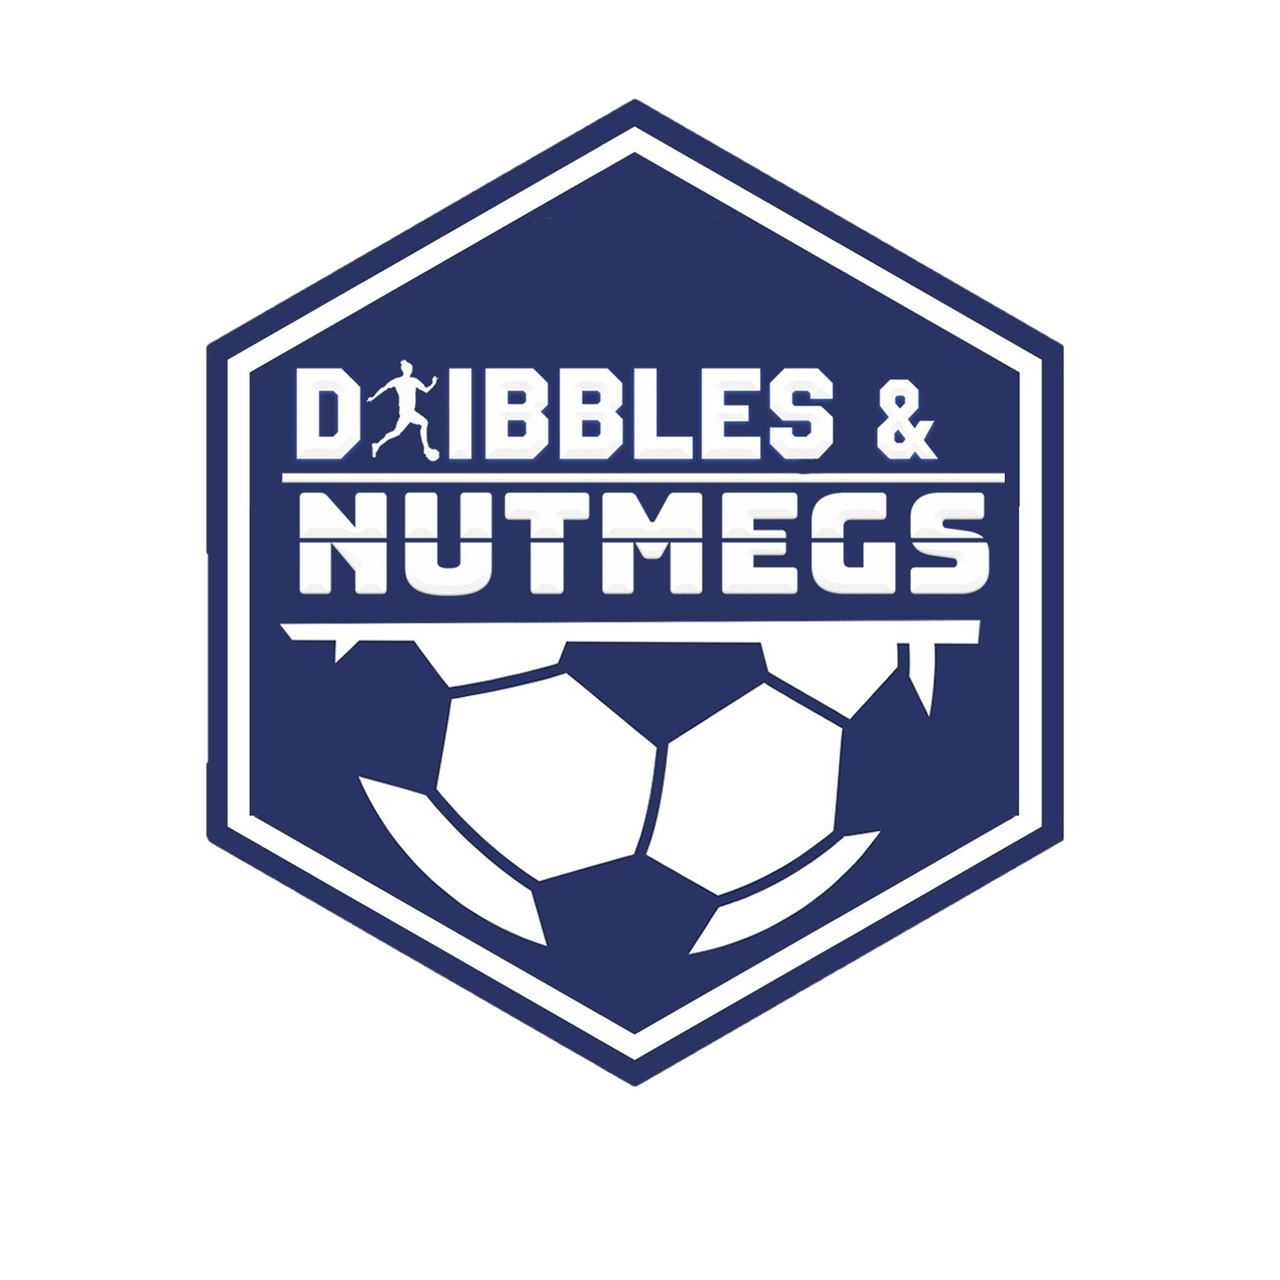 Dribbles and Nutmegs